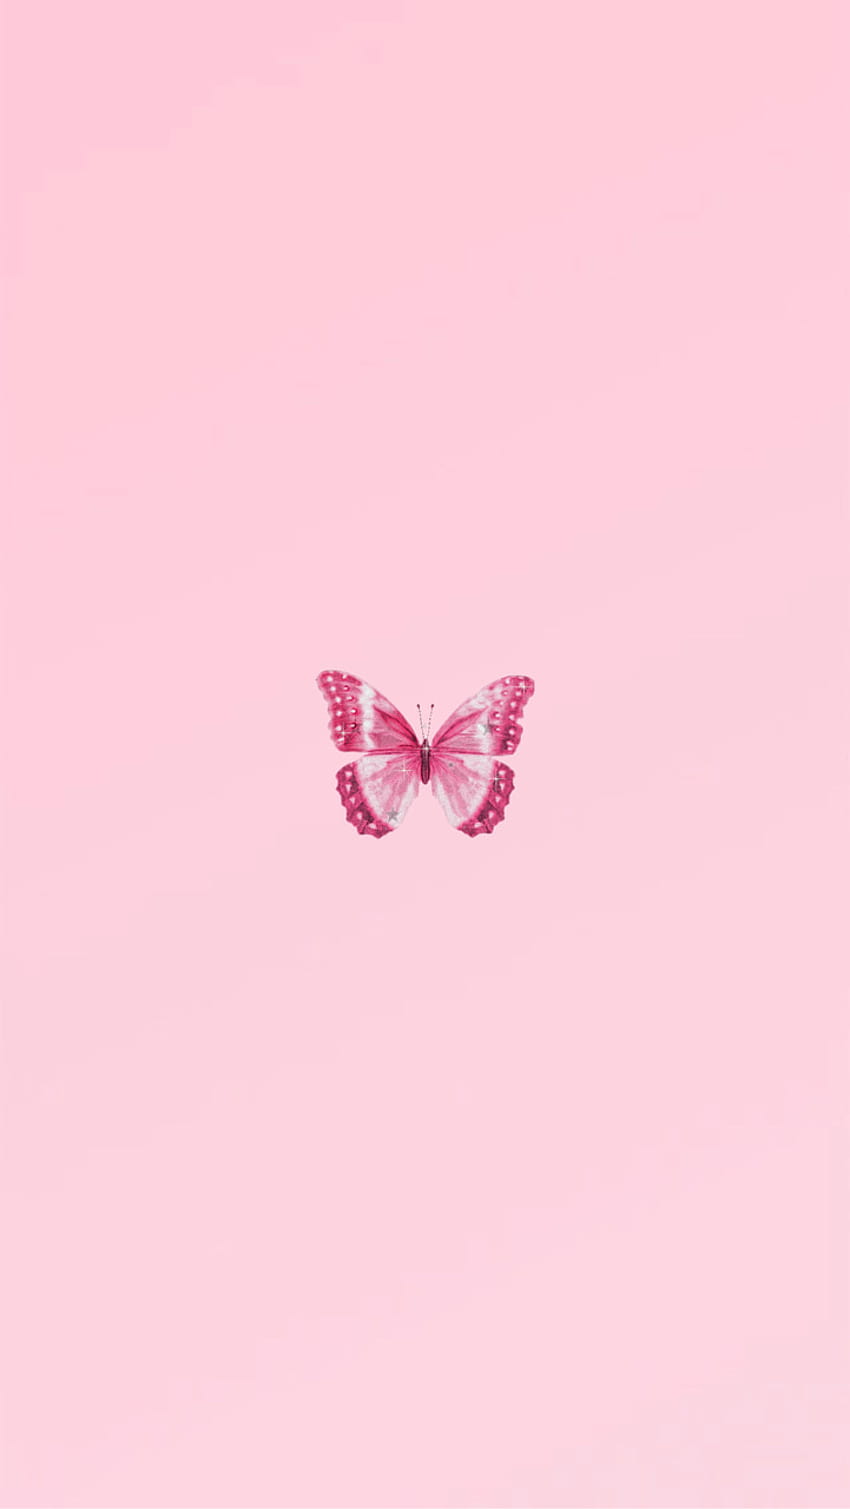 Iphone tumblr aesthetic ...pinterest, pink butterfly aesthetic HD ...